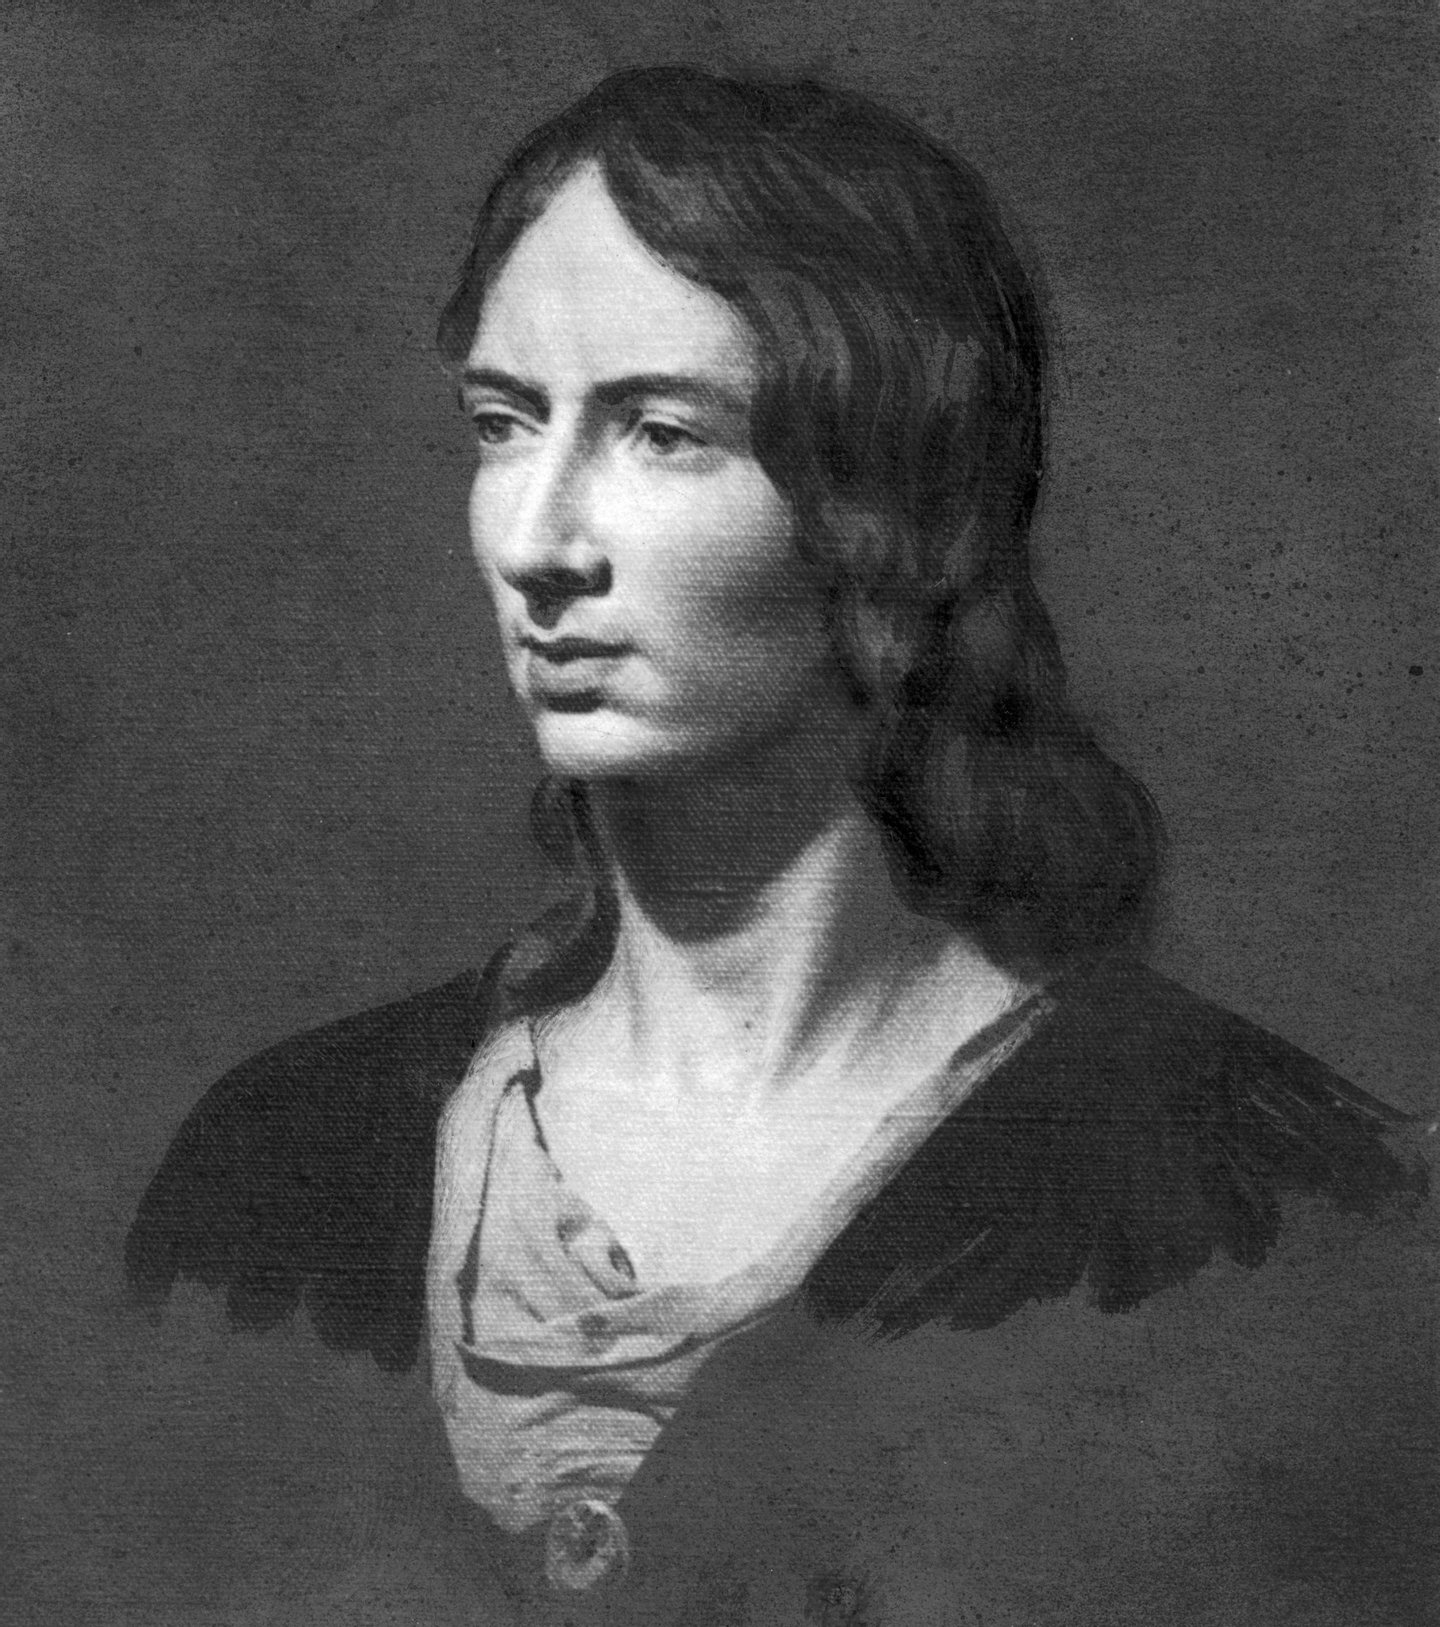 An oil painting of Emily Bronte (1818 - 1848), authoress of the novel 'Wuthering Heights,' published in 1847. (Photo by Hulton Archive/Getty Images)